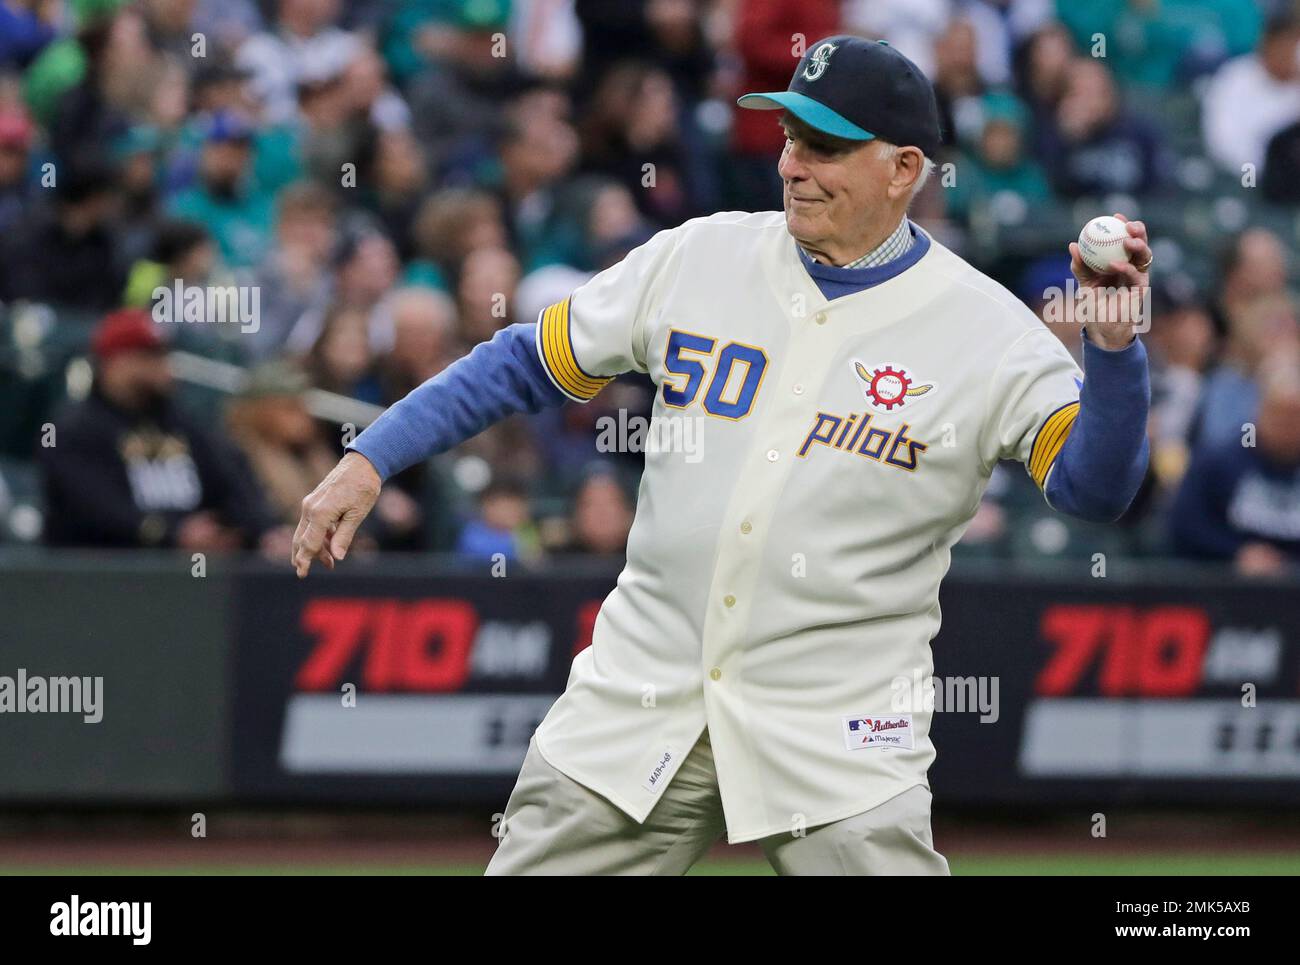 Former Washington Gov. Dan Evans throws out the first pitch of a baseball  game between the Seattle Mariners and the Houston Astros, Friday, April 12,  2019, in Seattle. Evans is wearing a